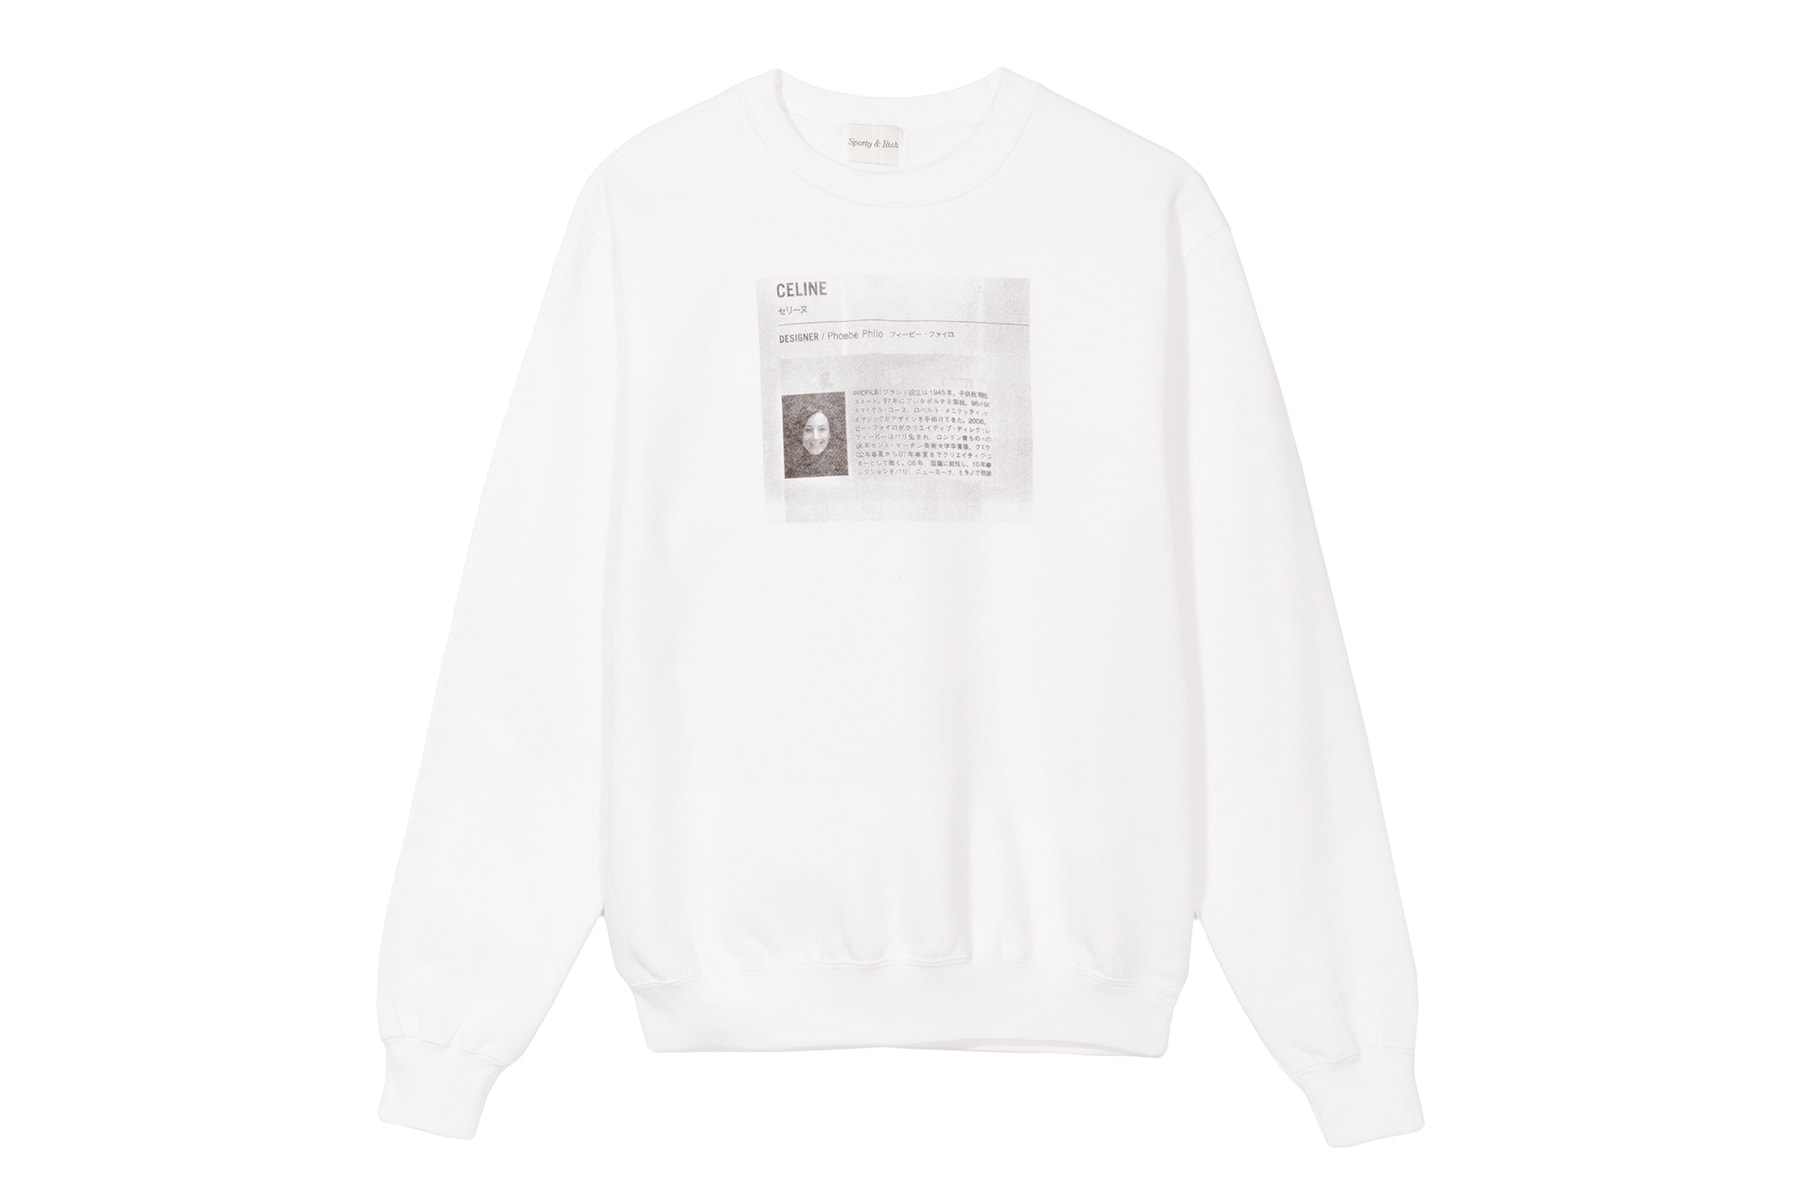 Emily Oberg Céline Phoebe Philo Sweater Crewneck Sweatshirt White Bio Japanese Sporty and Rich Price Release Where to Buy